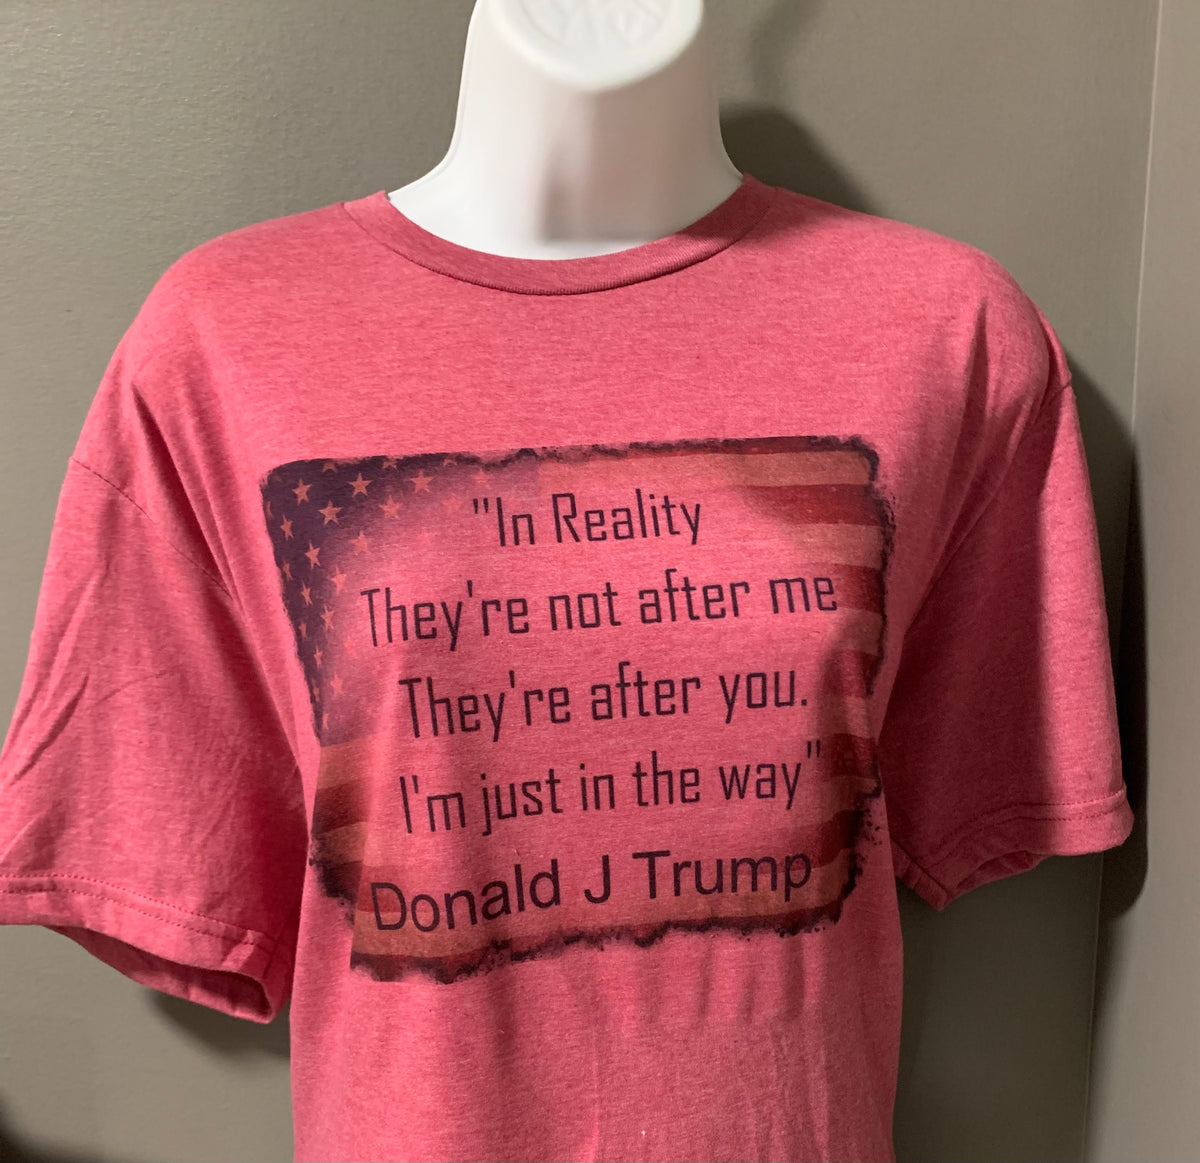 Trump "After You" Graphic Tee